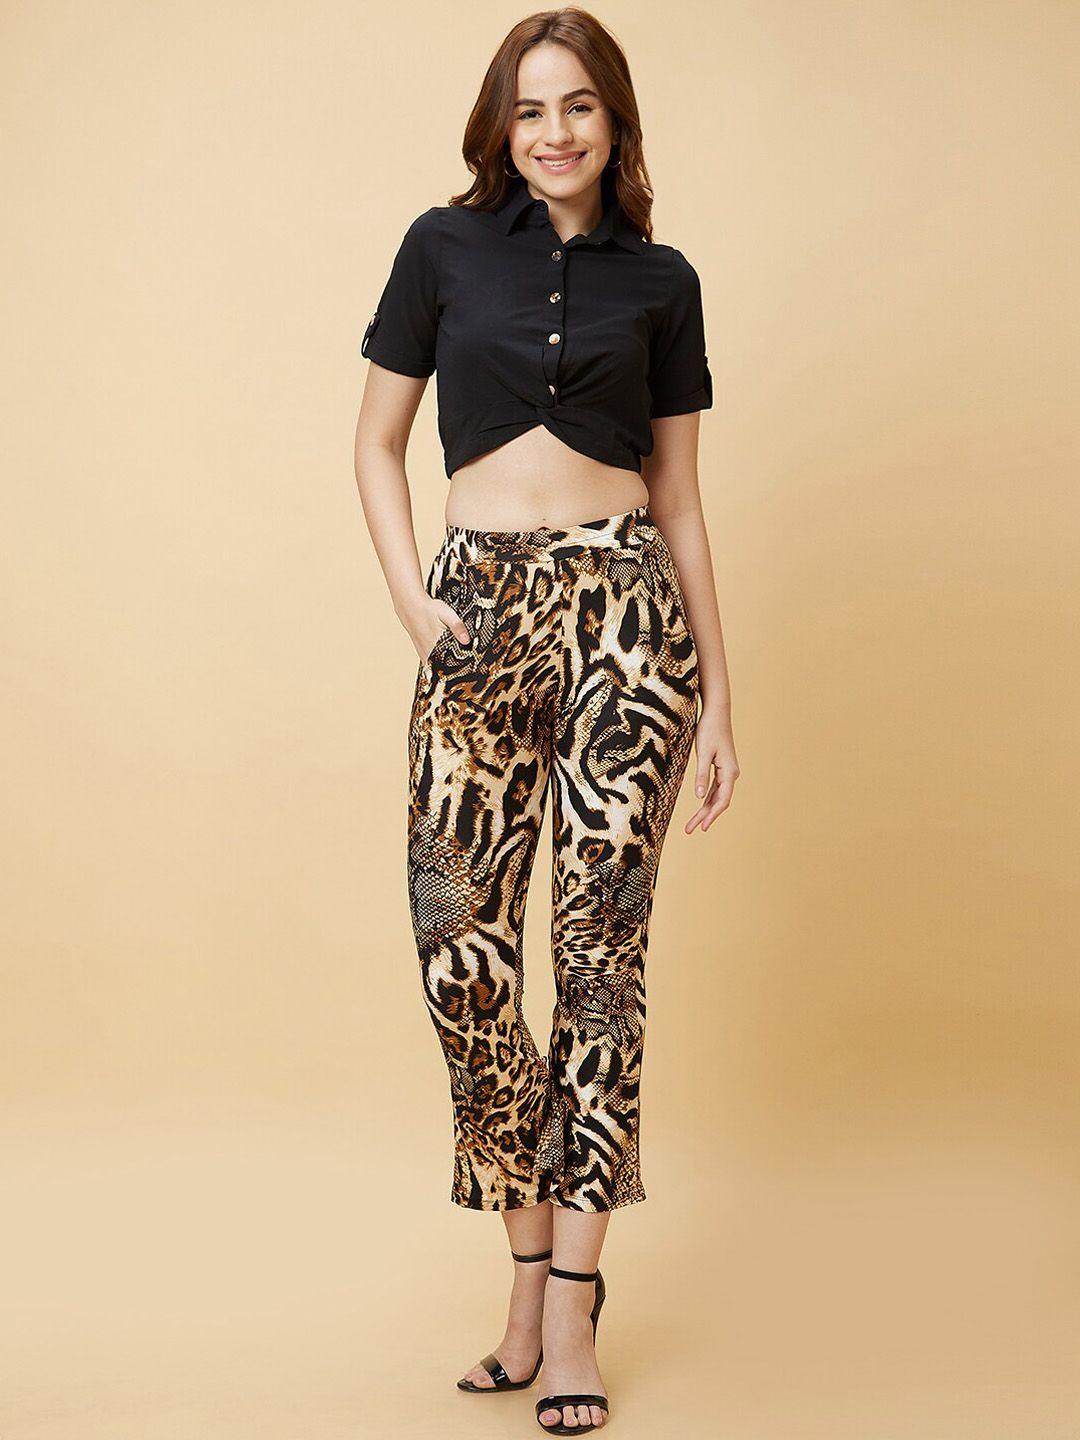 globus shirt collar crop top with printed trousers co-ords